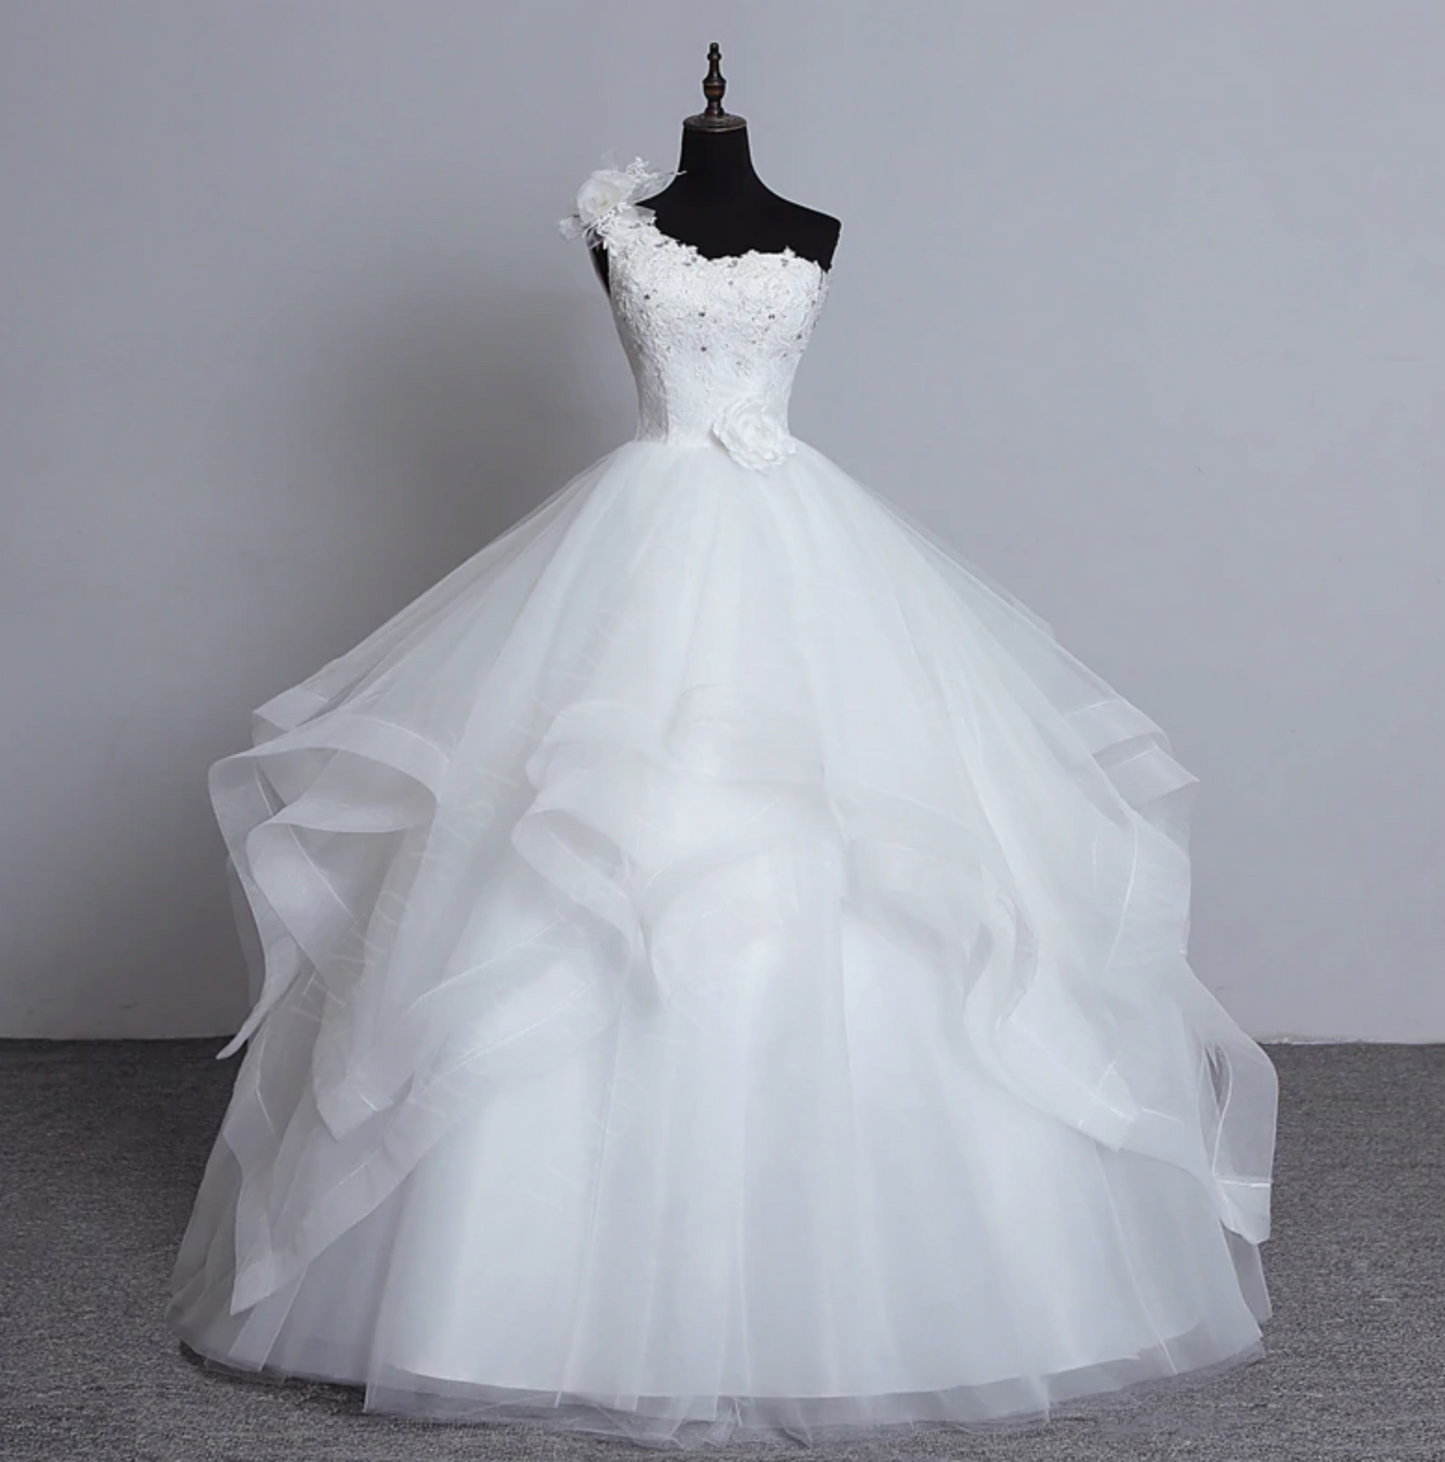 Luxury Beaded One Shoulder Tiered Organza Princess Wedding Dress, + Sizes Available - TulleLux Bridal Crowns &  Accessories 